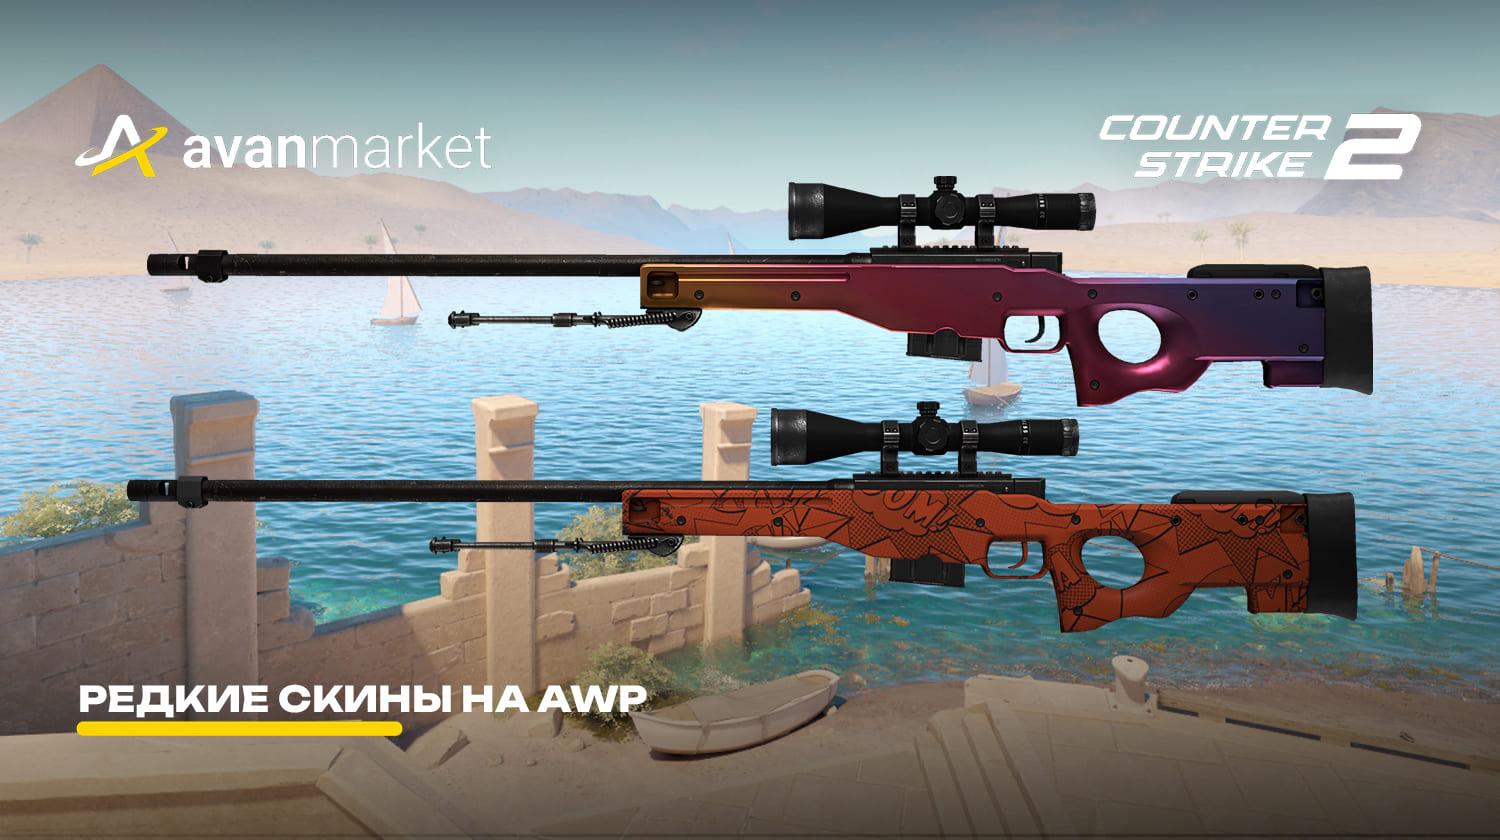 Picture for redkie-skiny-na-awp